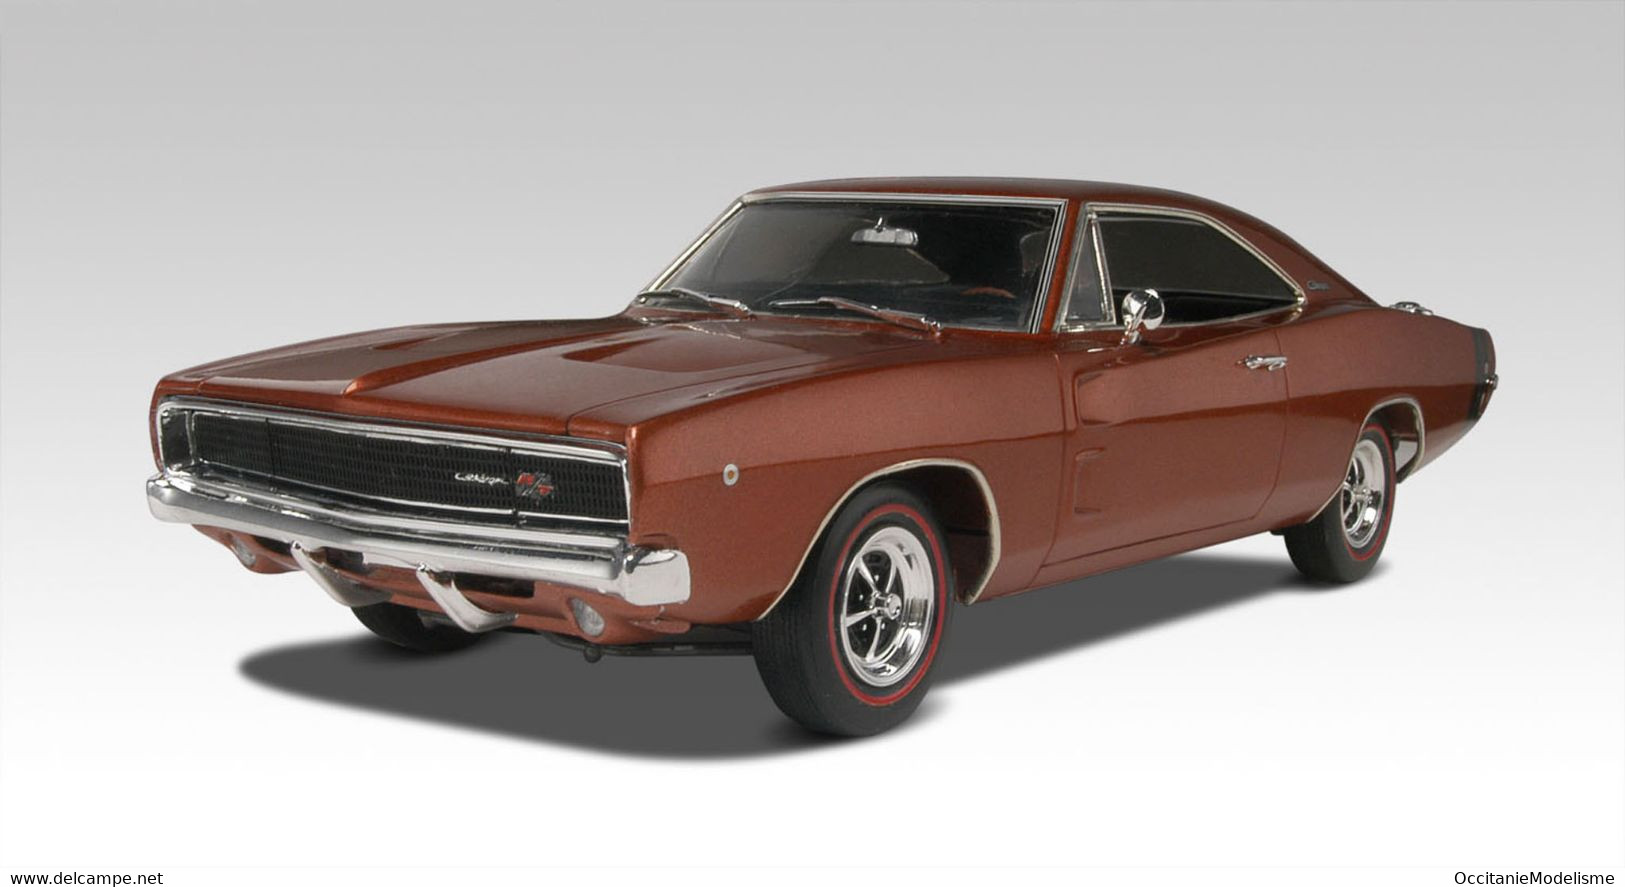 Revell - DODGE CHARGER R/T 1968 2N'1 Maquette Kit Plastique Réf. 14202 85-4202 Neuf NBO 1/25 - Carros